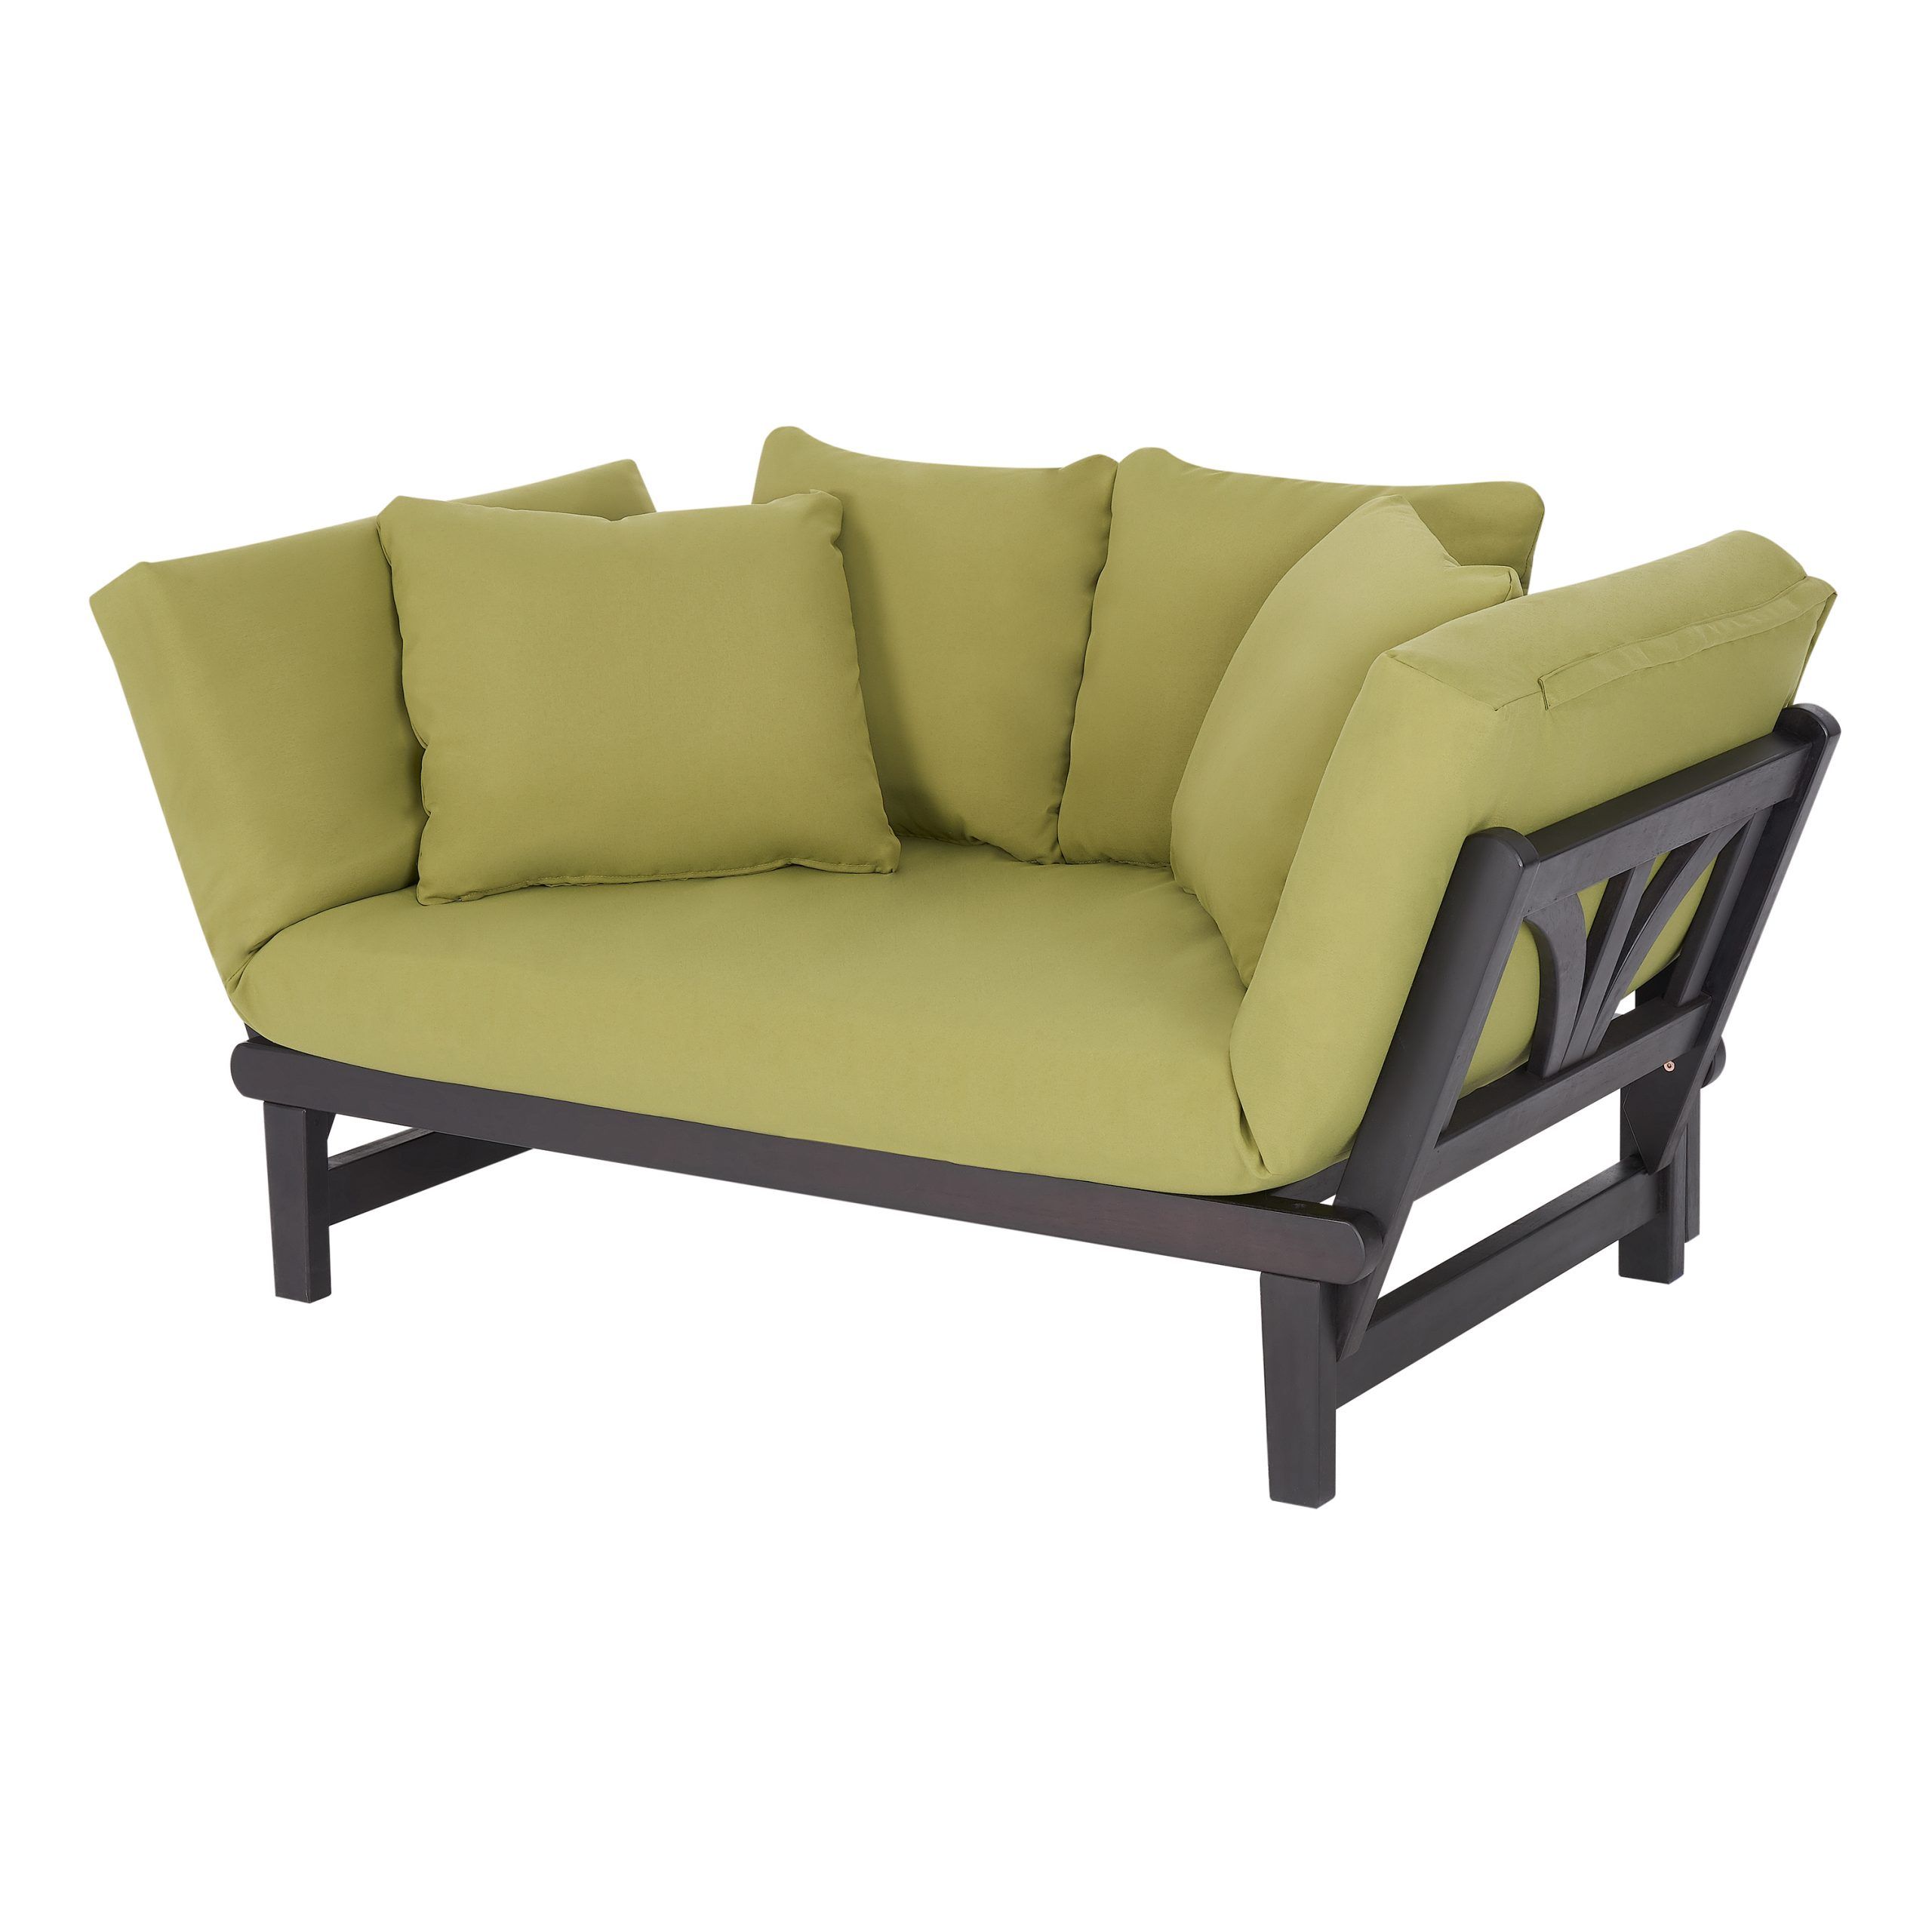 Better Homes & Gardens Delahey Convertible Studio Outdoor In Convertible Sofas (View 5 of 15)